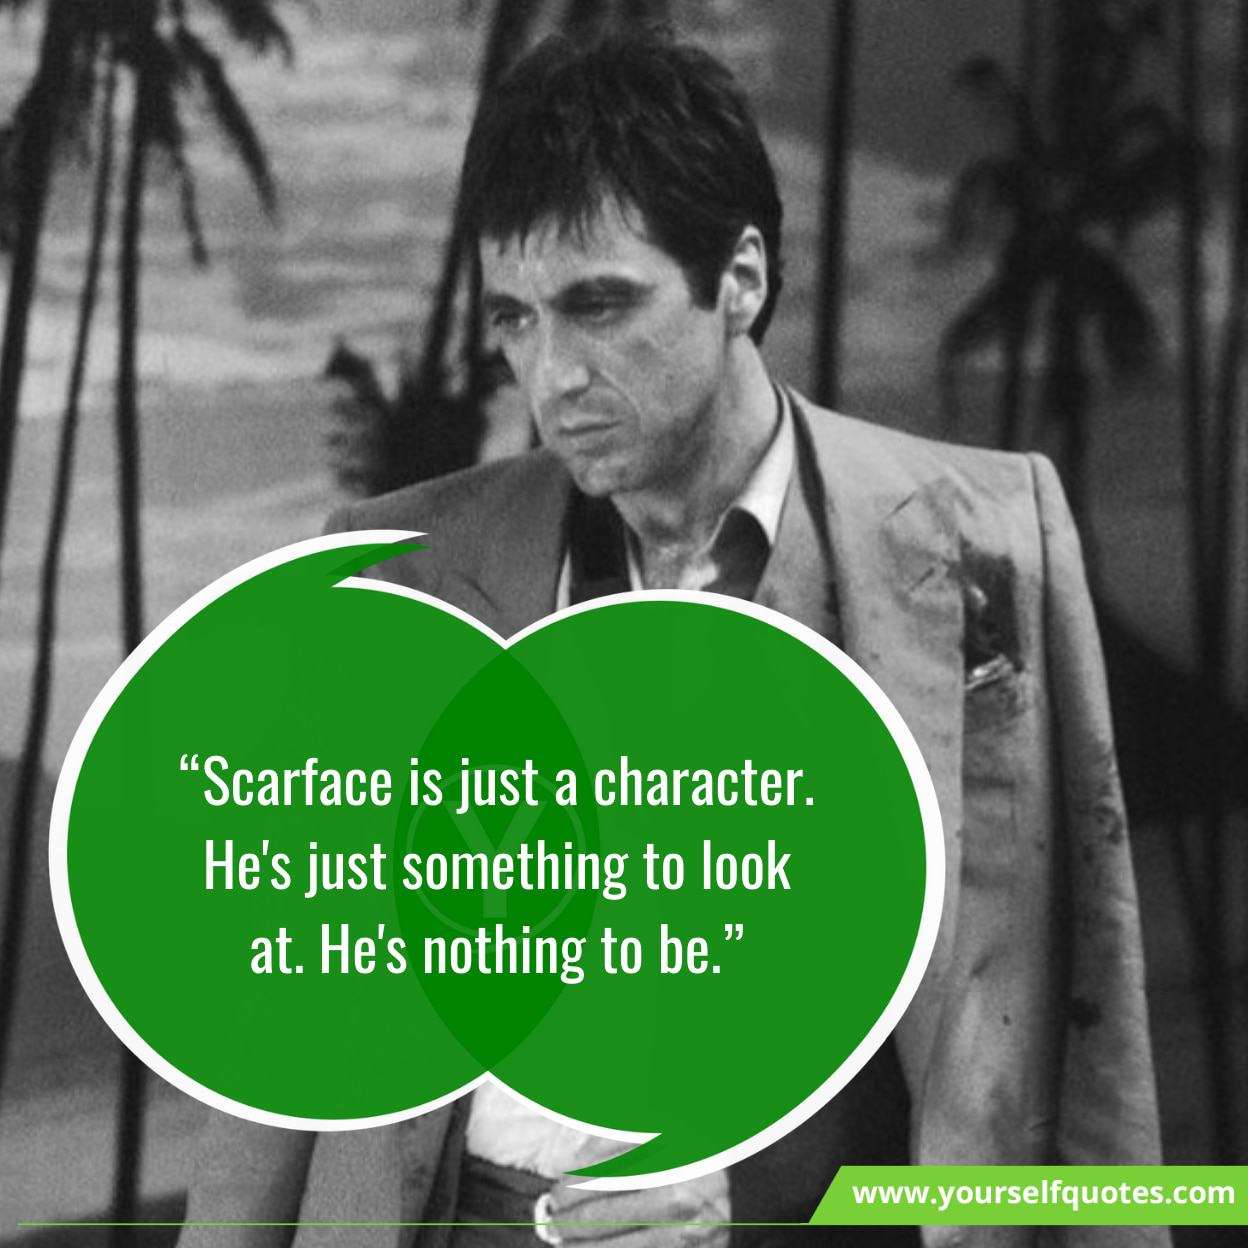 Best Scarface Quotes 